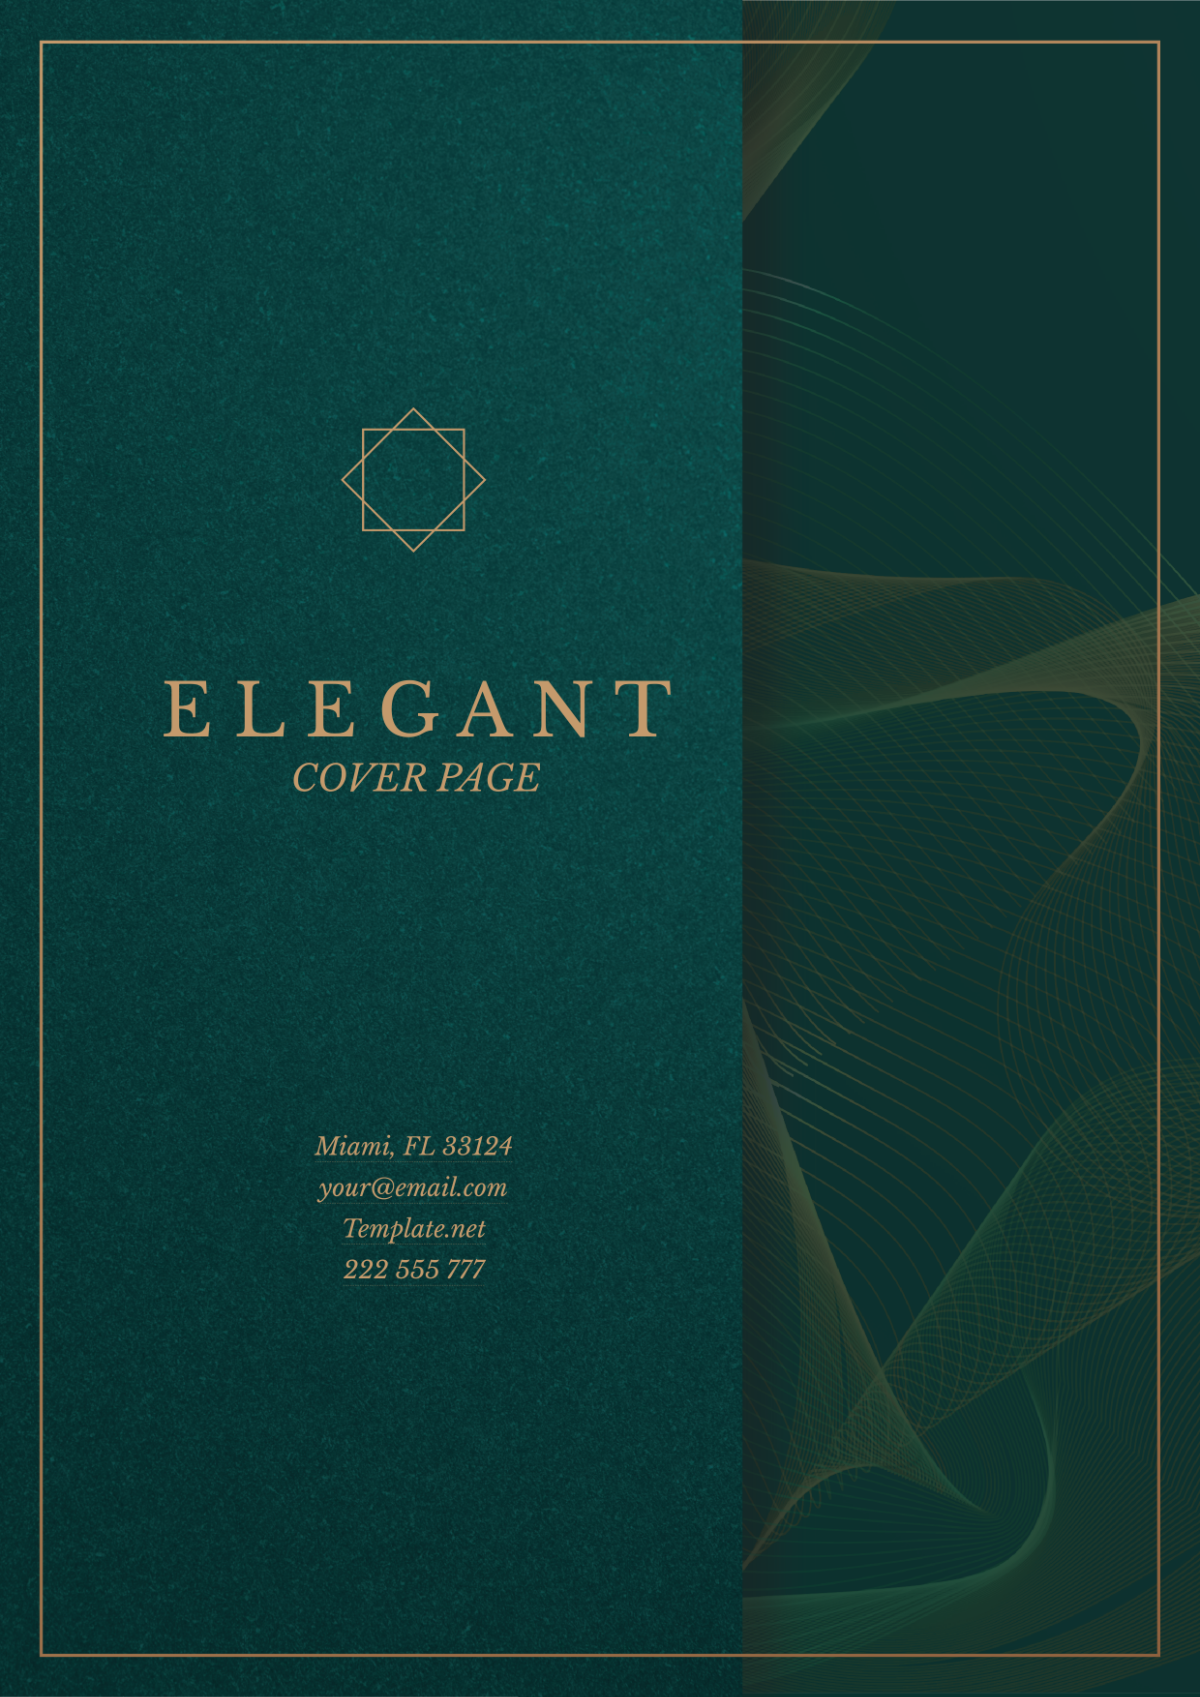 Free Elegant Heading Cover Page Template